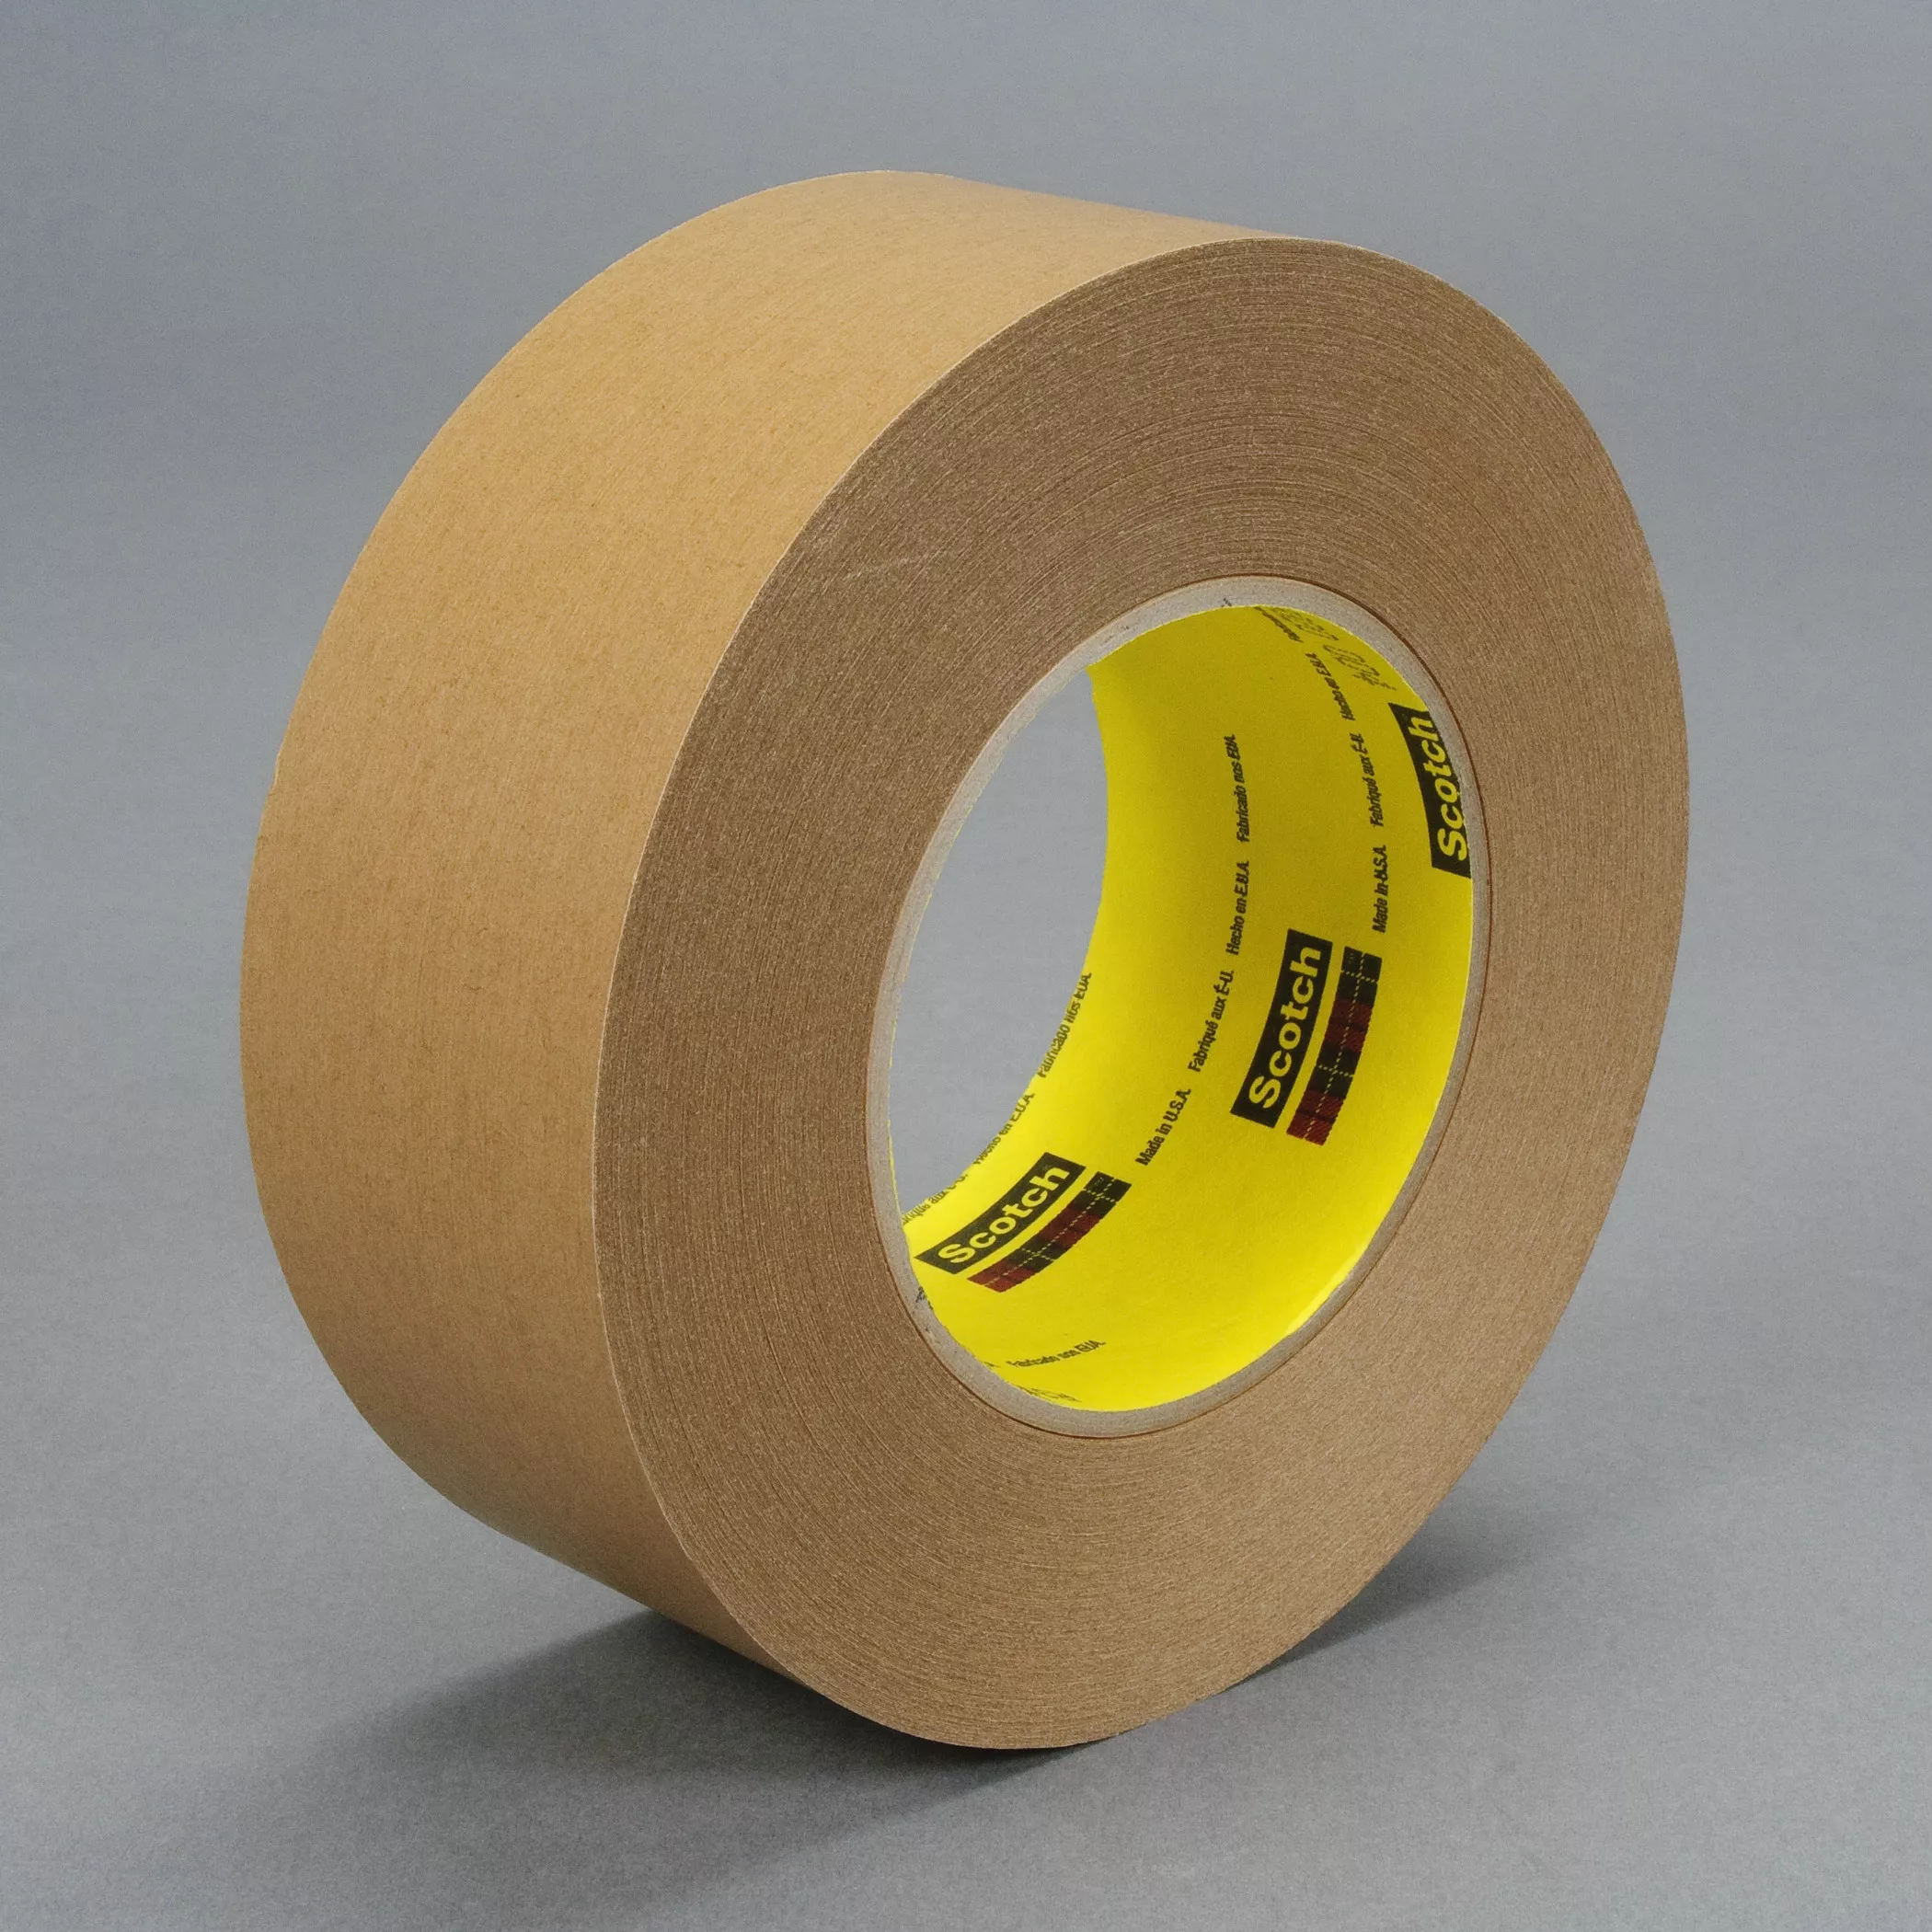 SKU 7100028029 | 3M™ Repulpable Strong Single Coated Tape R3187